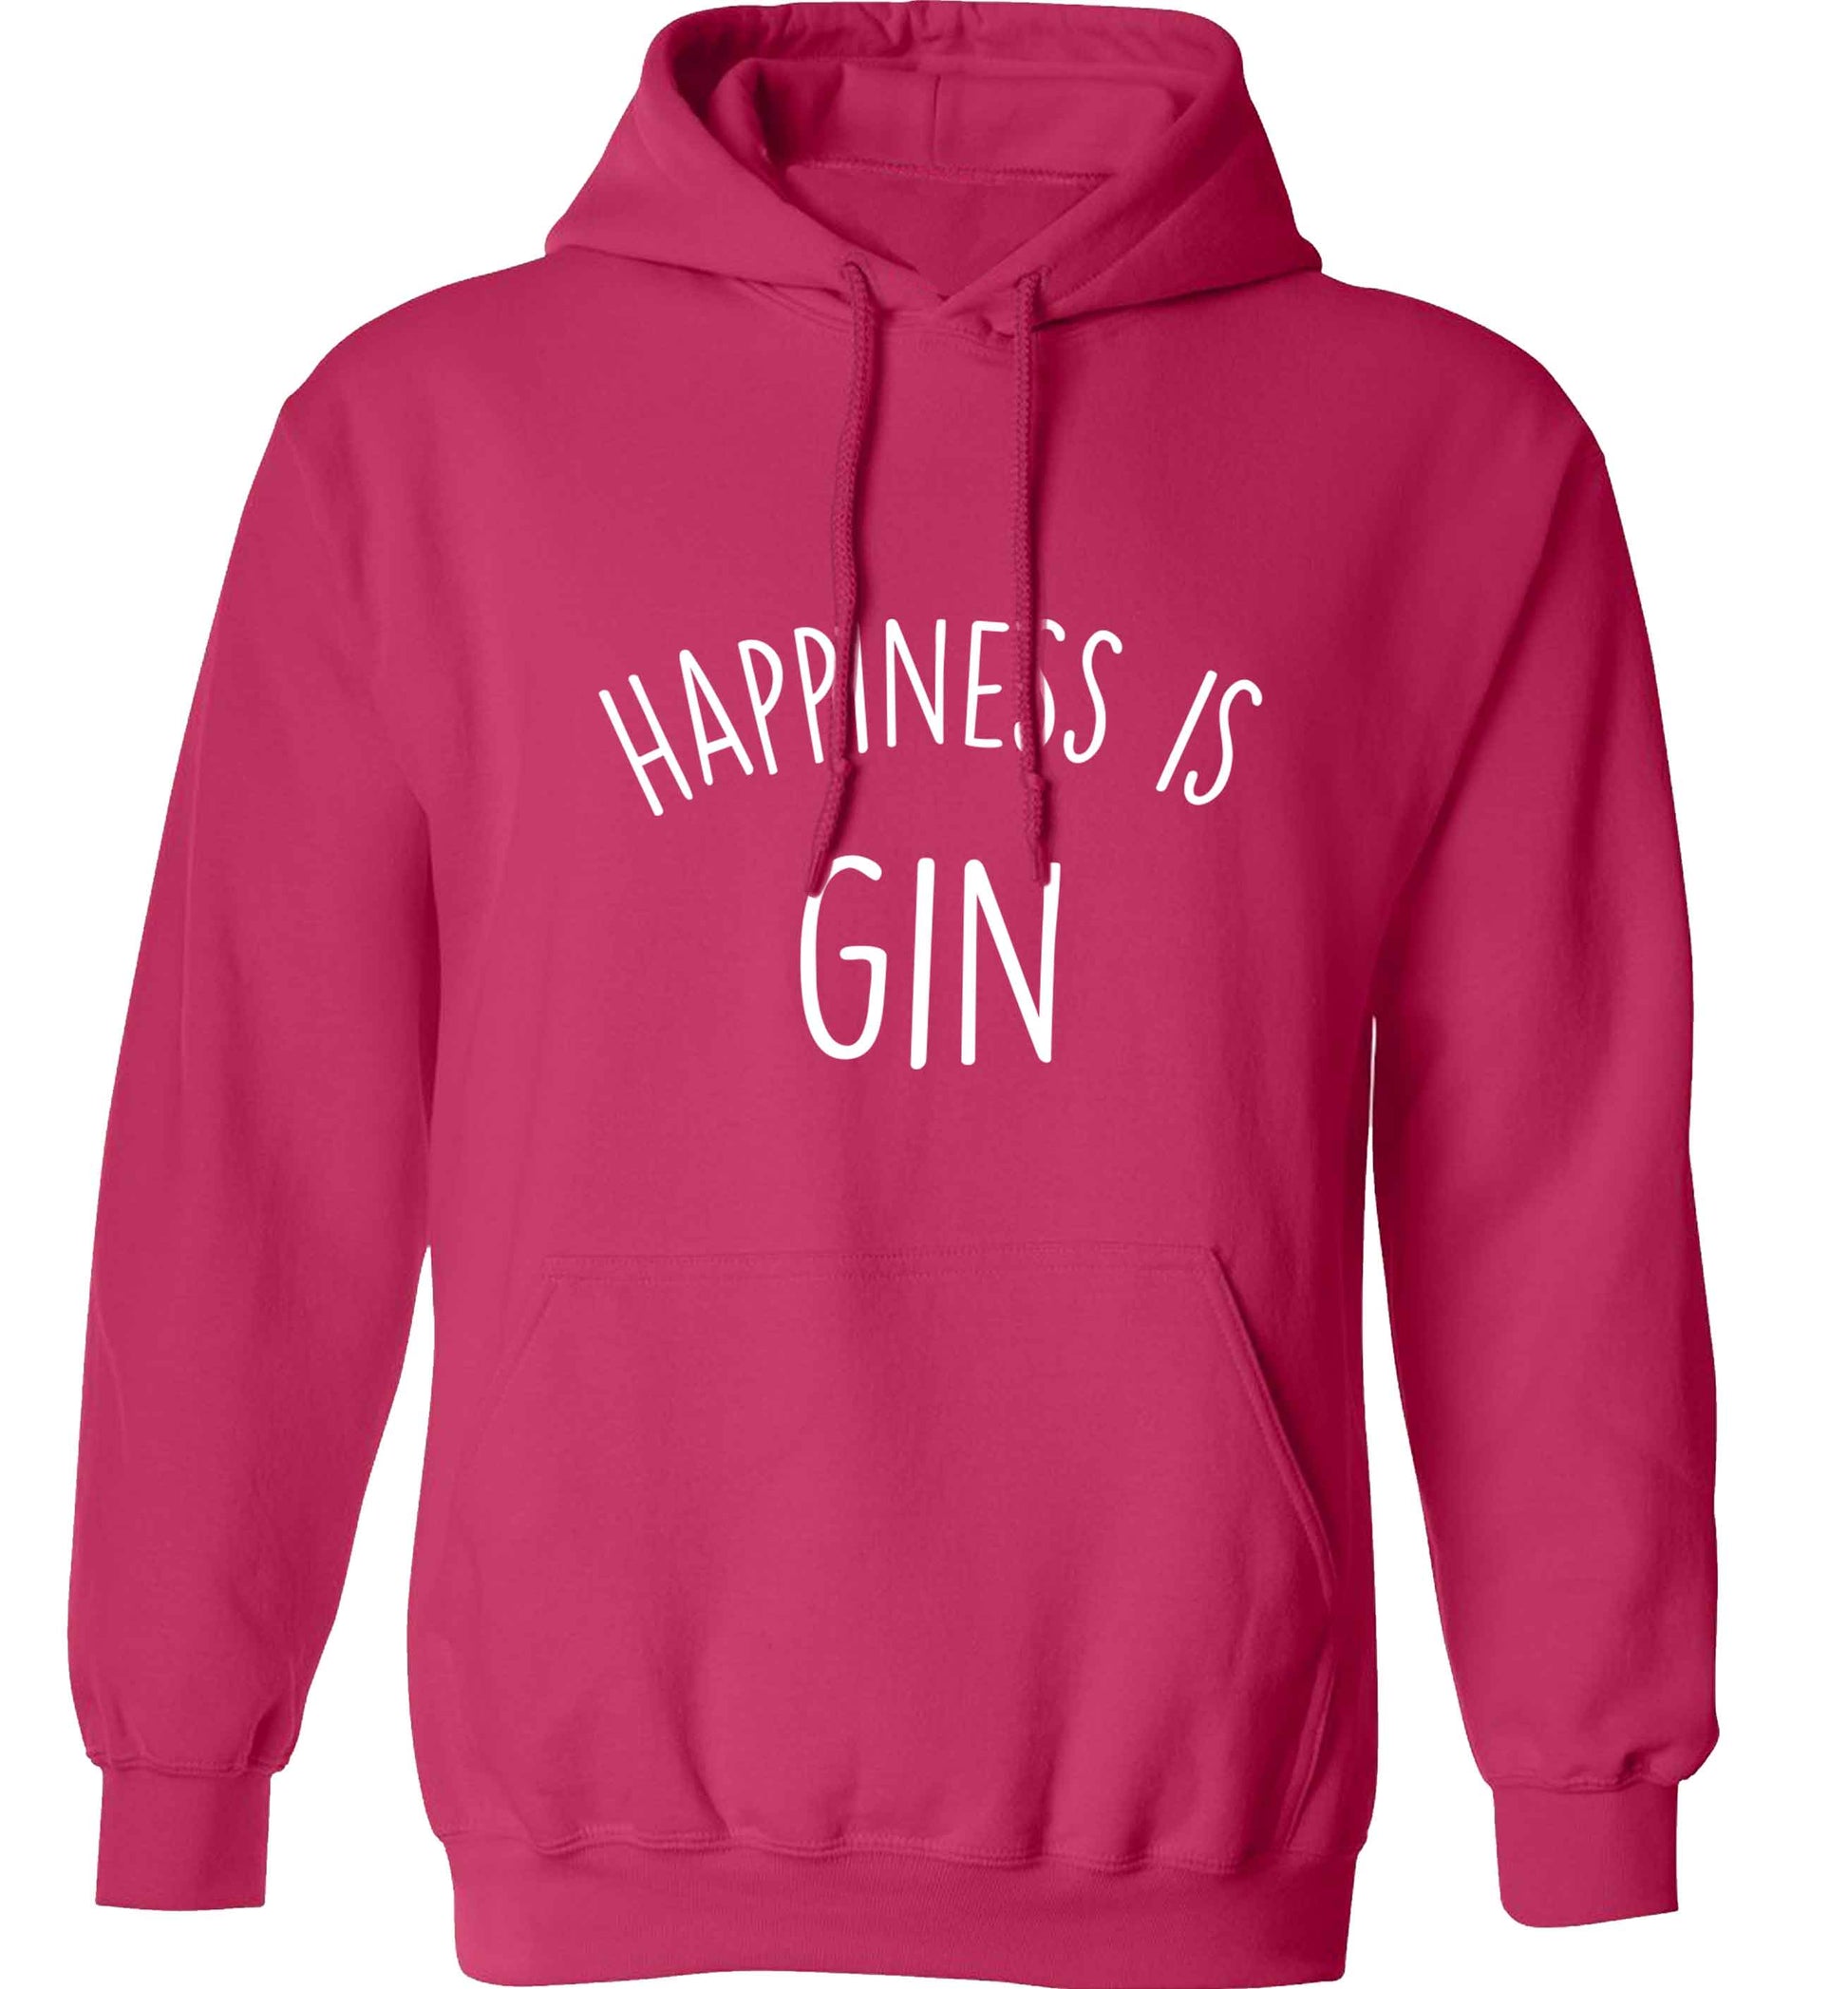 Happiness is gin adults unisex pink hoodie 2XL